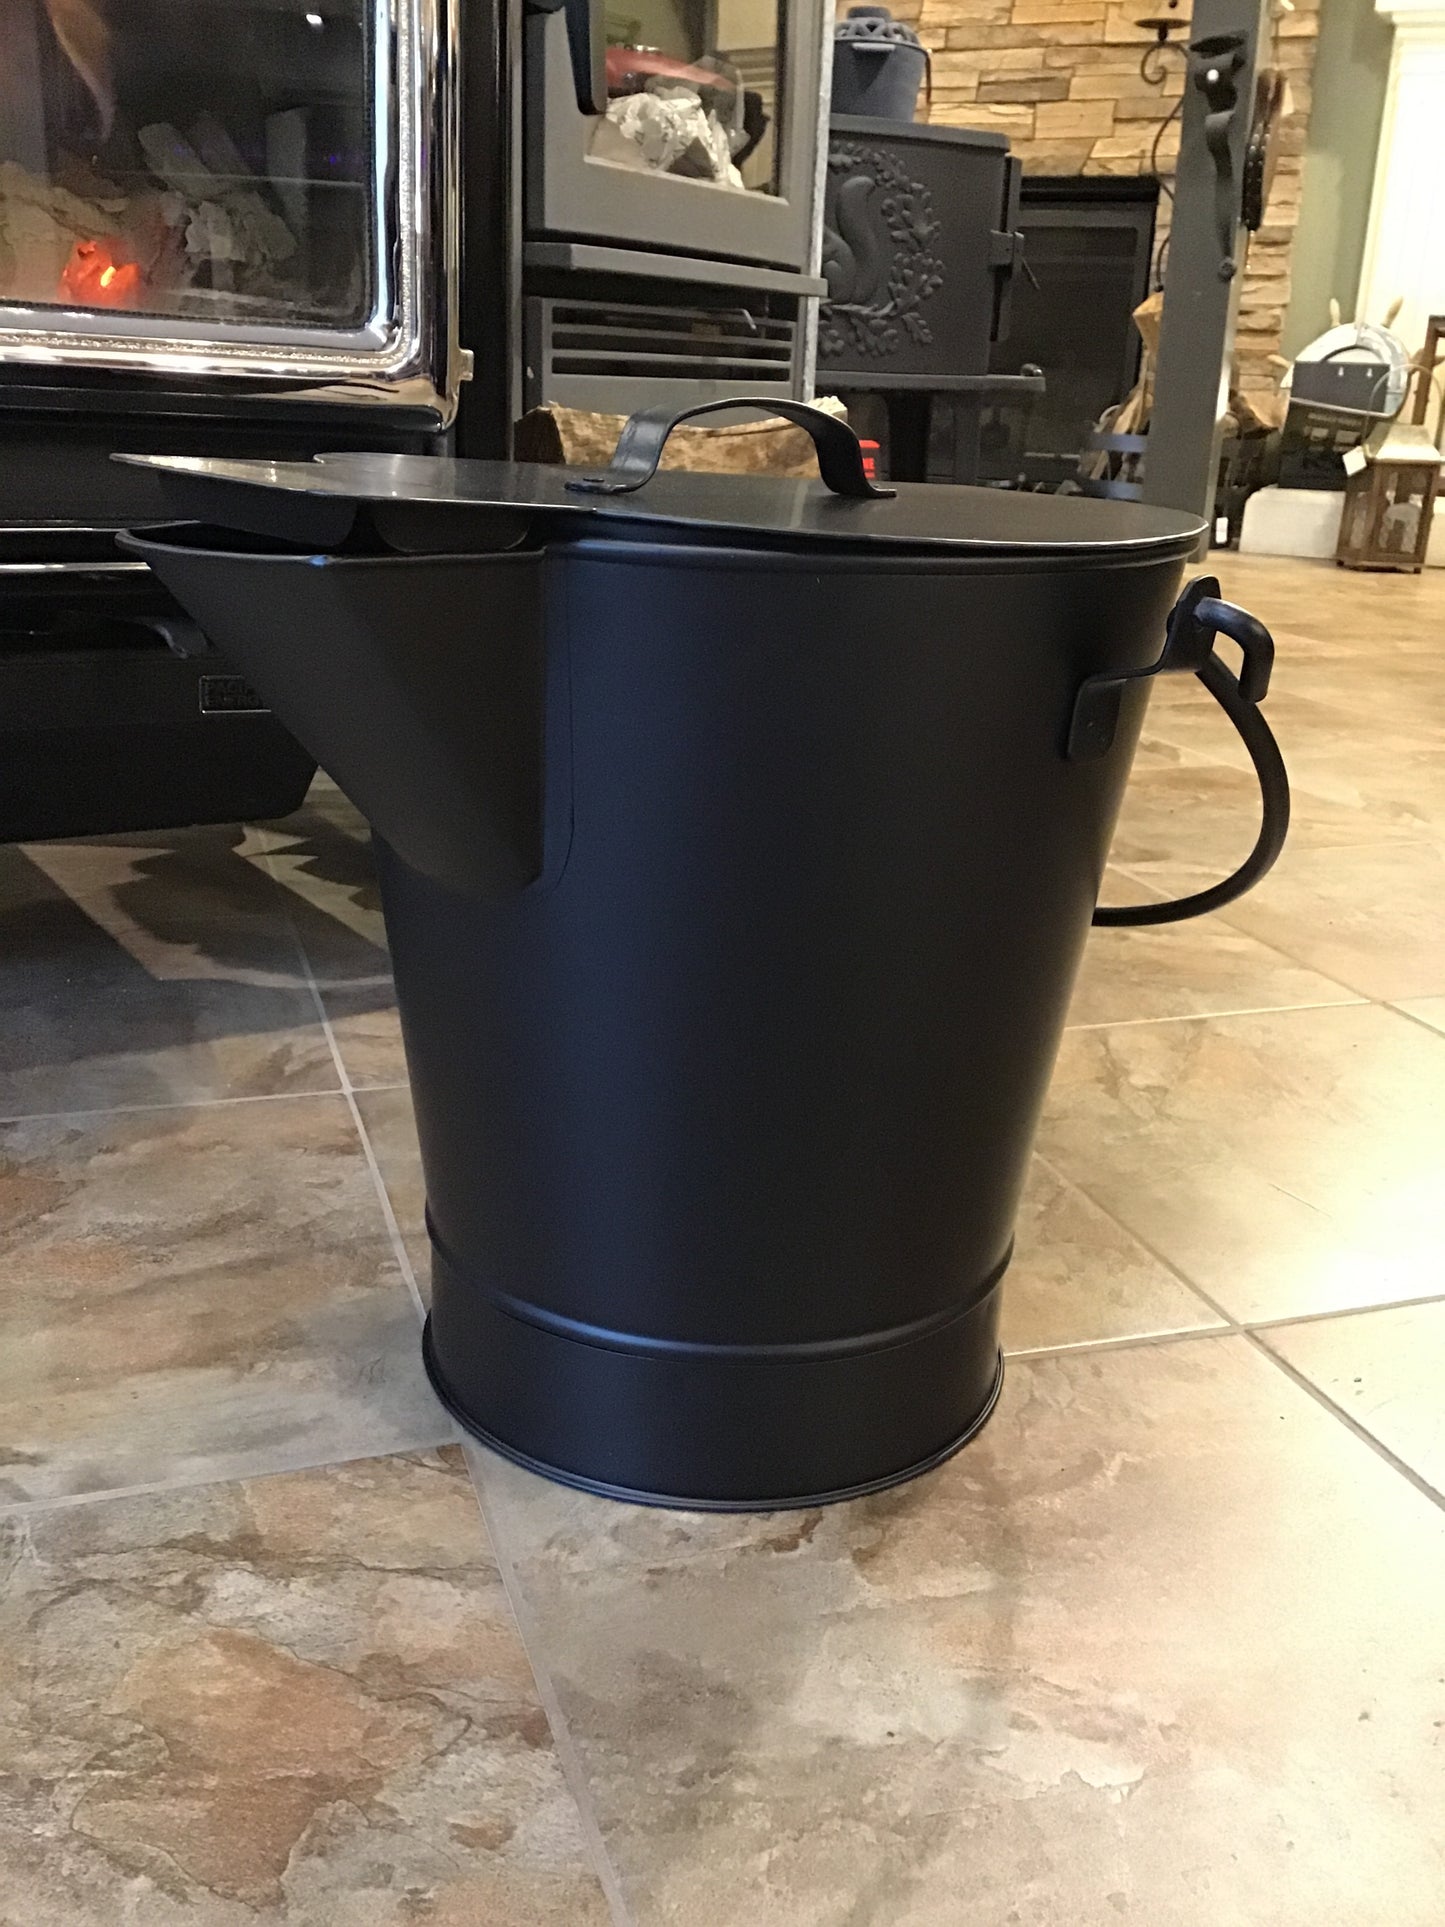 Ash Bucket - Country Stoves and Sunrooms Ltd